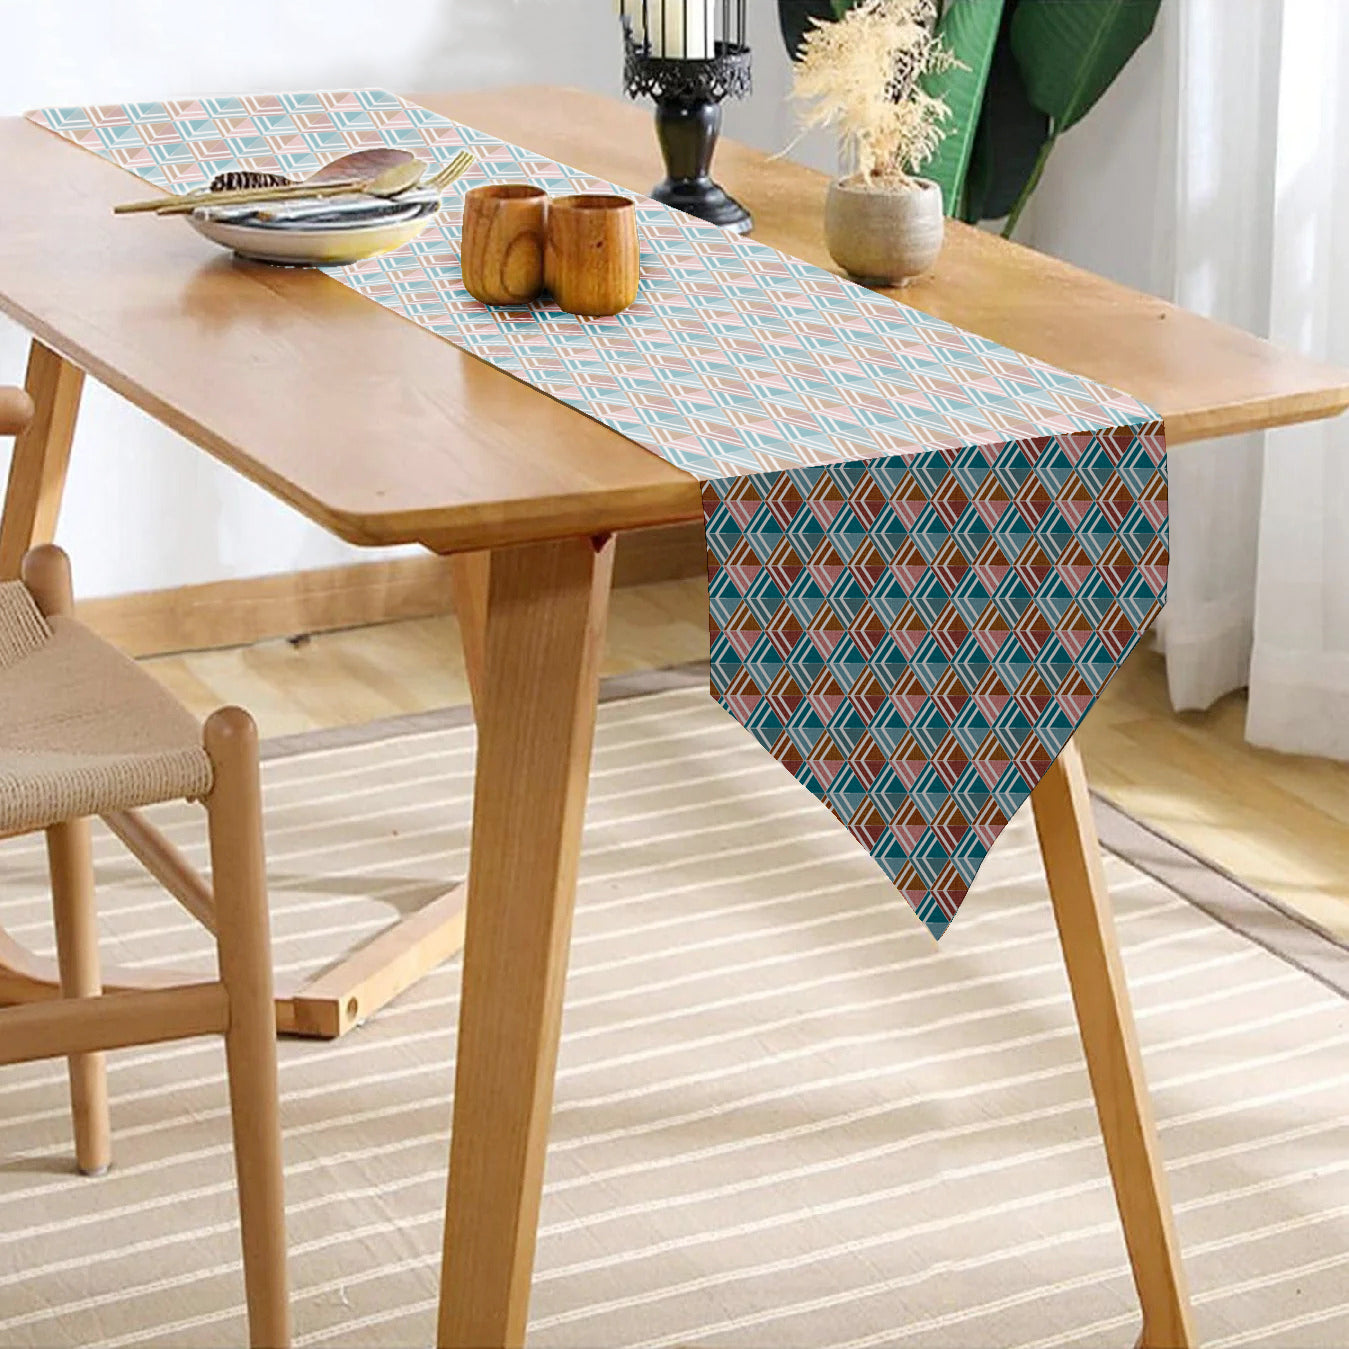 ILLUSION TABLE RUNNER MULTI TRIANGLE CAMEL/PINK MATTY (12X72 INCH) DIGITAL PRINTED (Copy)